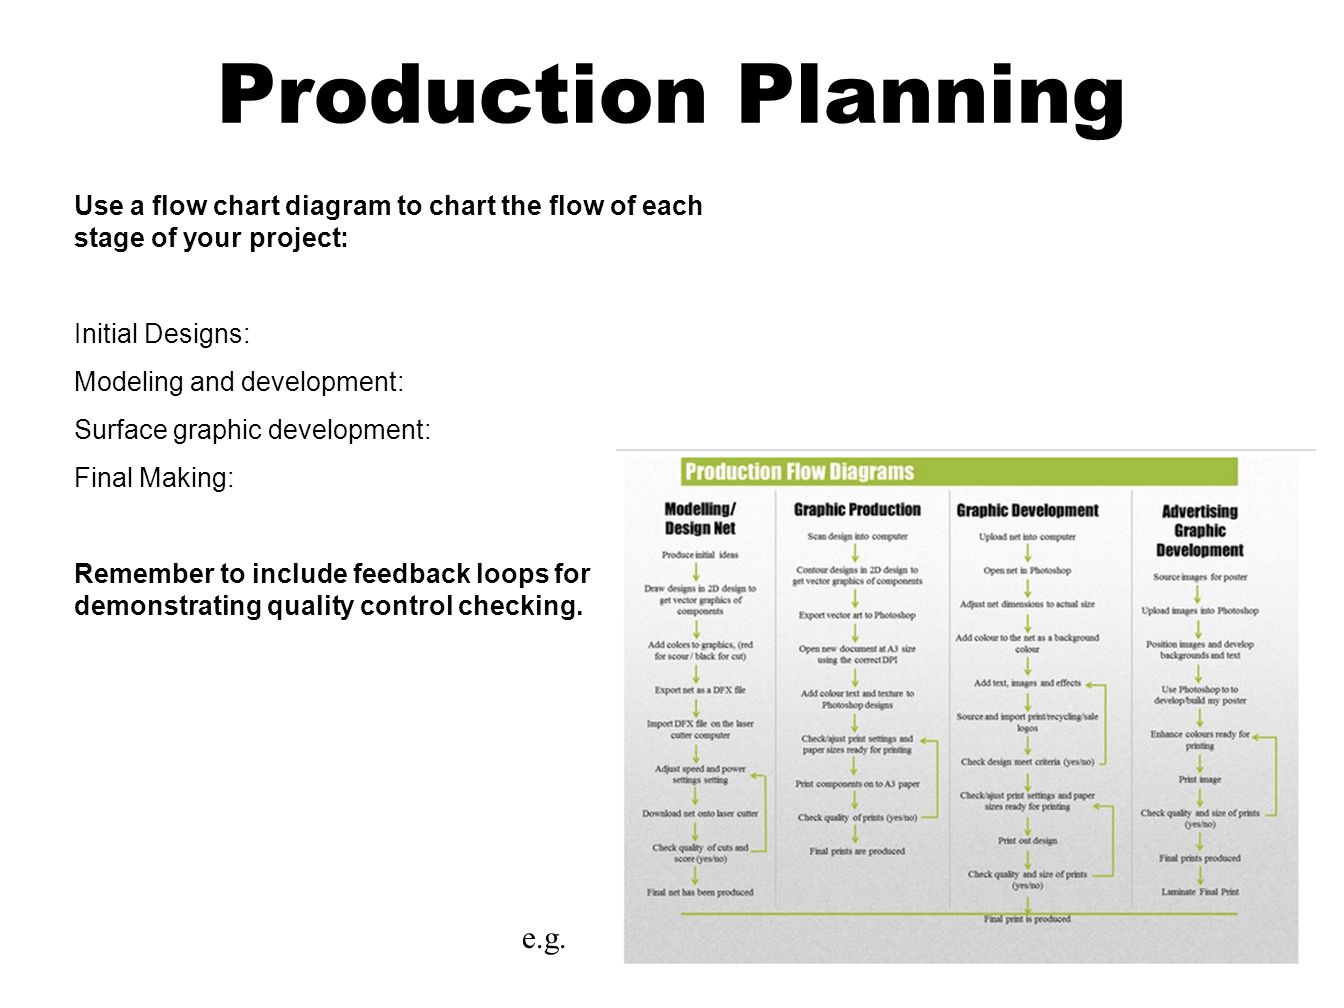 Production Planning Use a flow chart diagram to chart the flow of each stage of your project: Initial Designs: Modeling and development: Surface graphic development: Final Making: Remember to include feedback loops for demonstrating quality control checking.